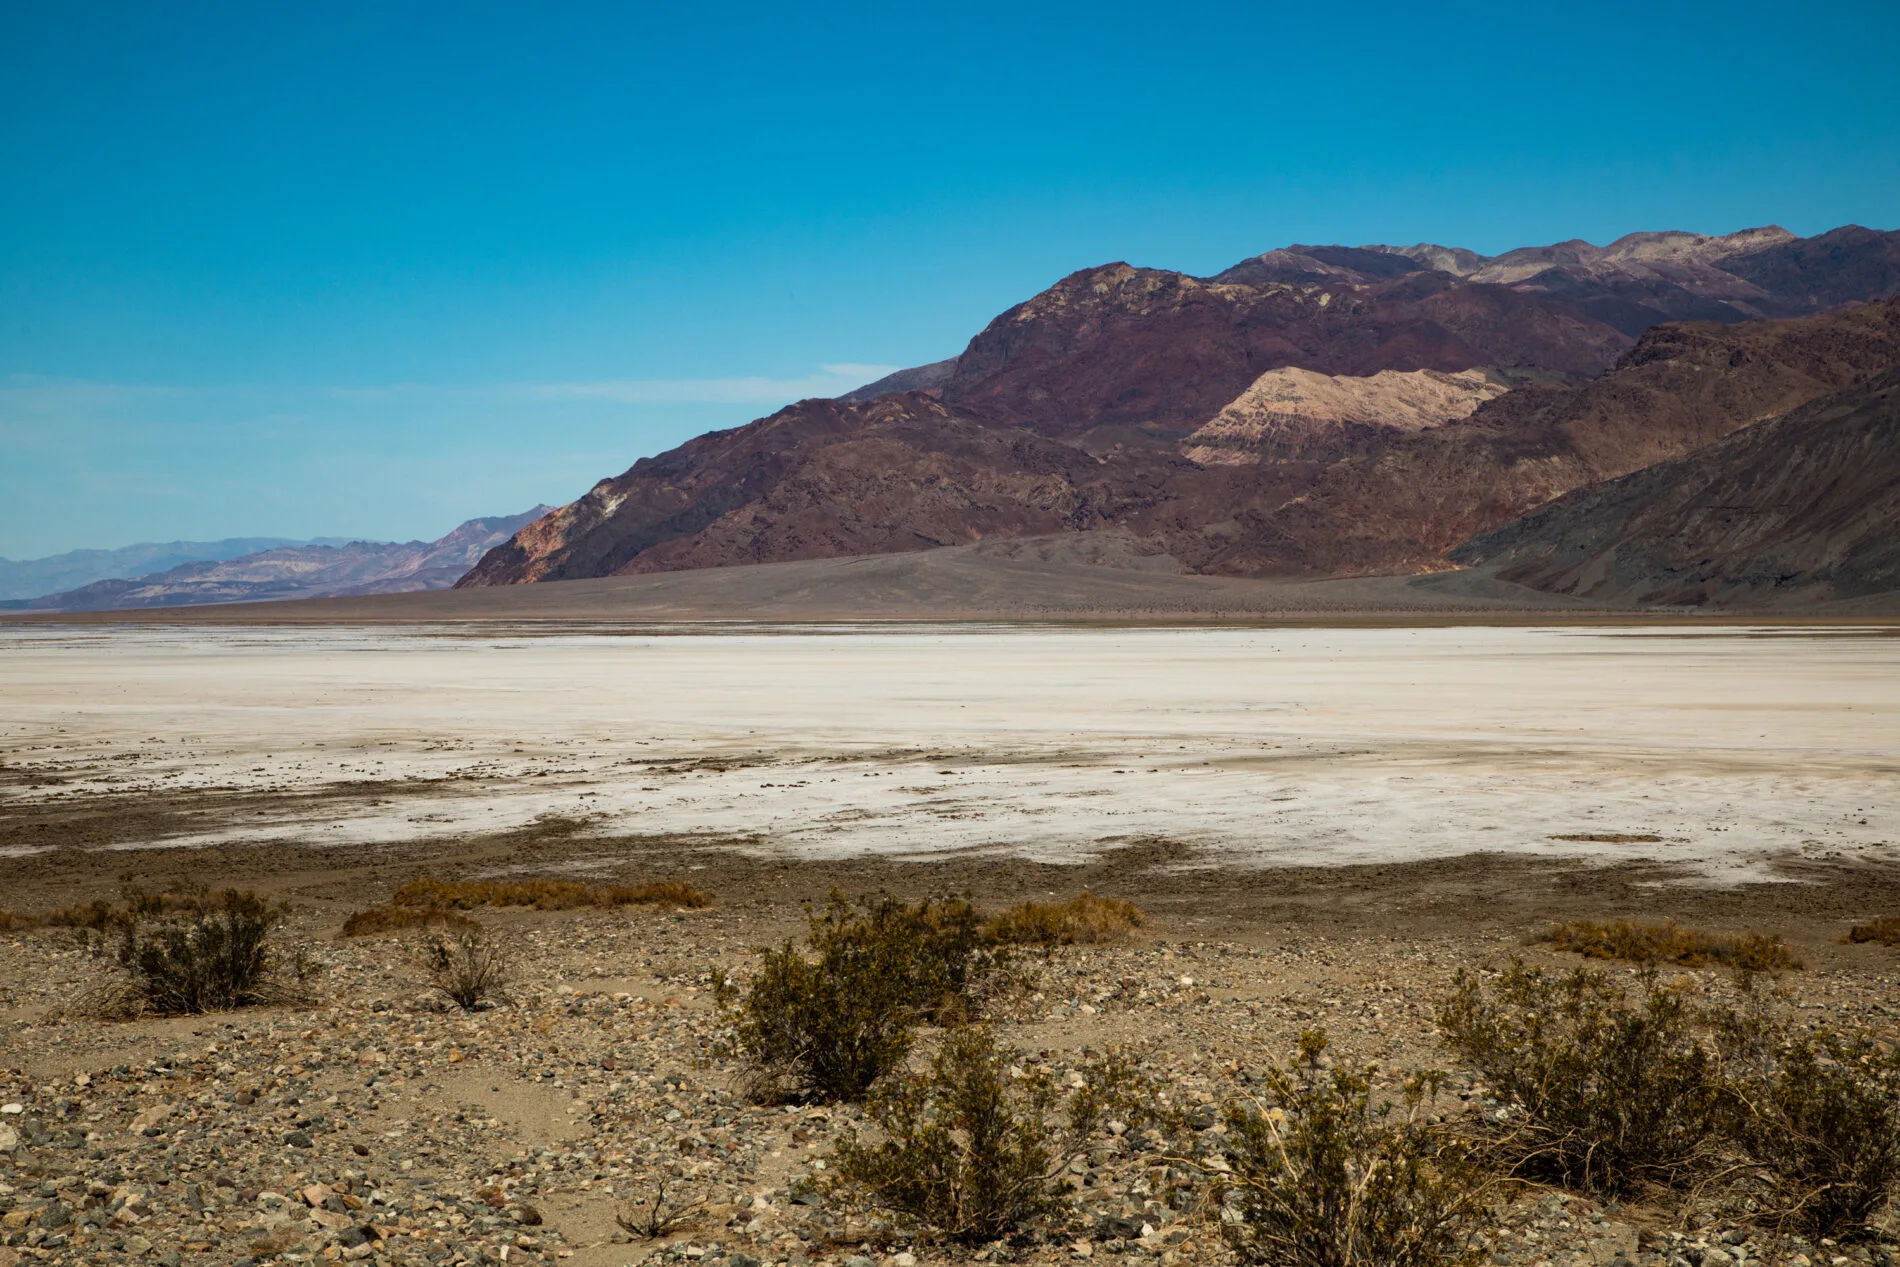 A view down the valley looking towards Badwater Basin on another clear sunny weather day in Death Valley.